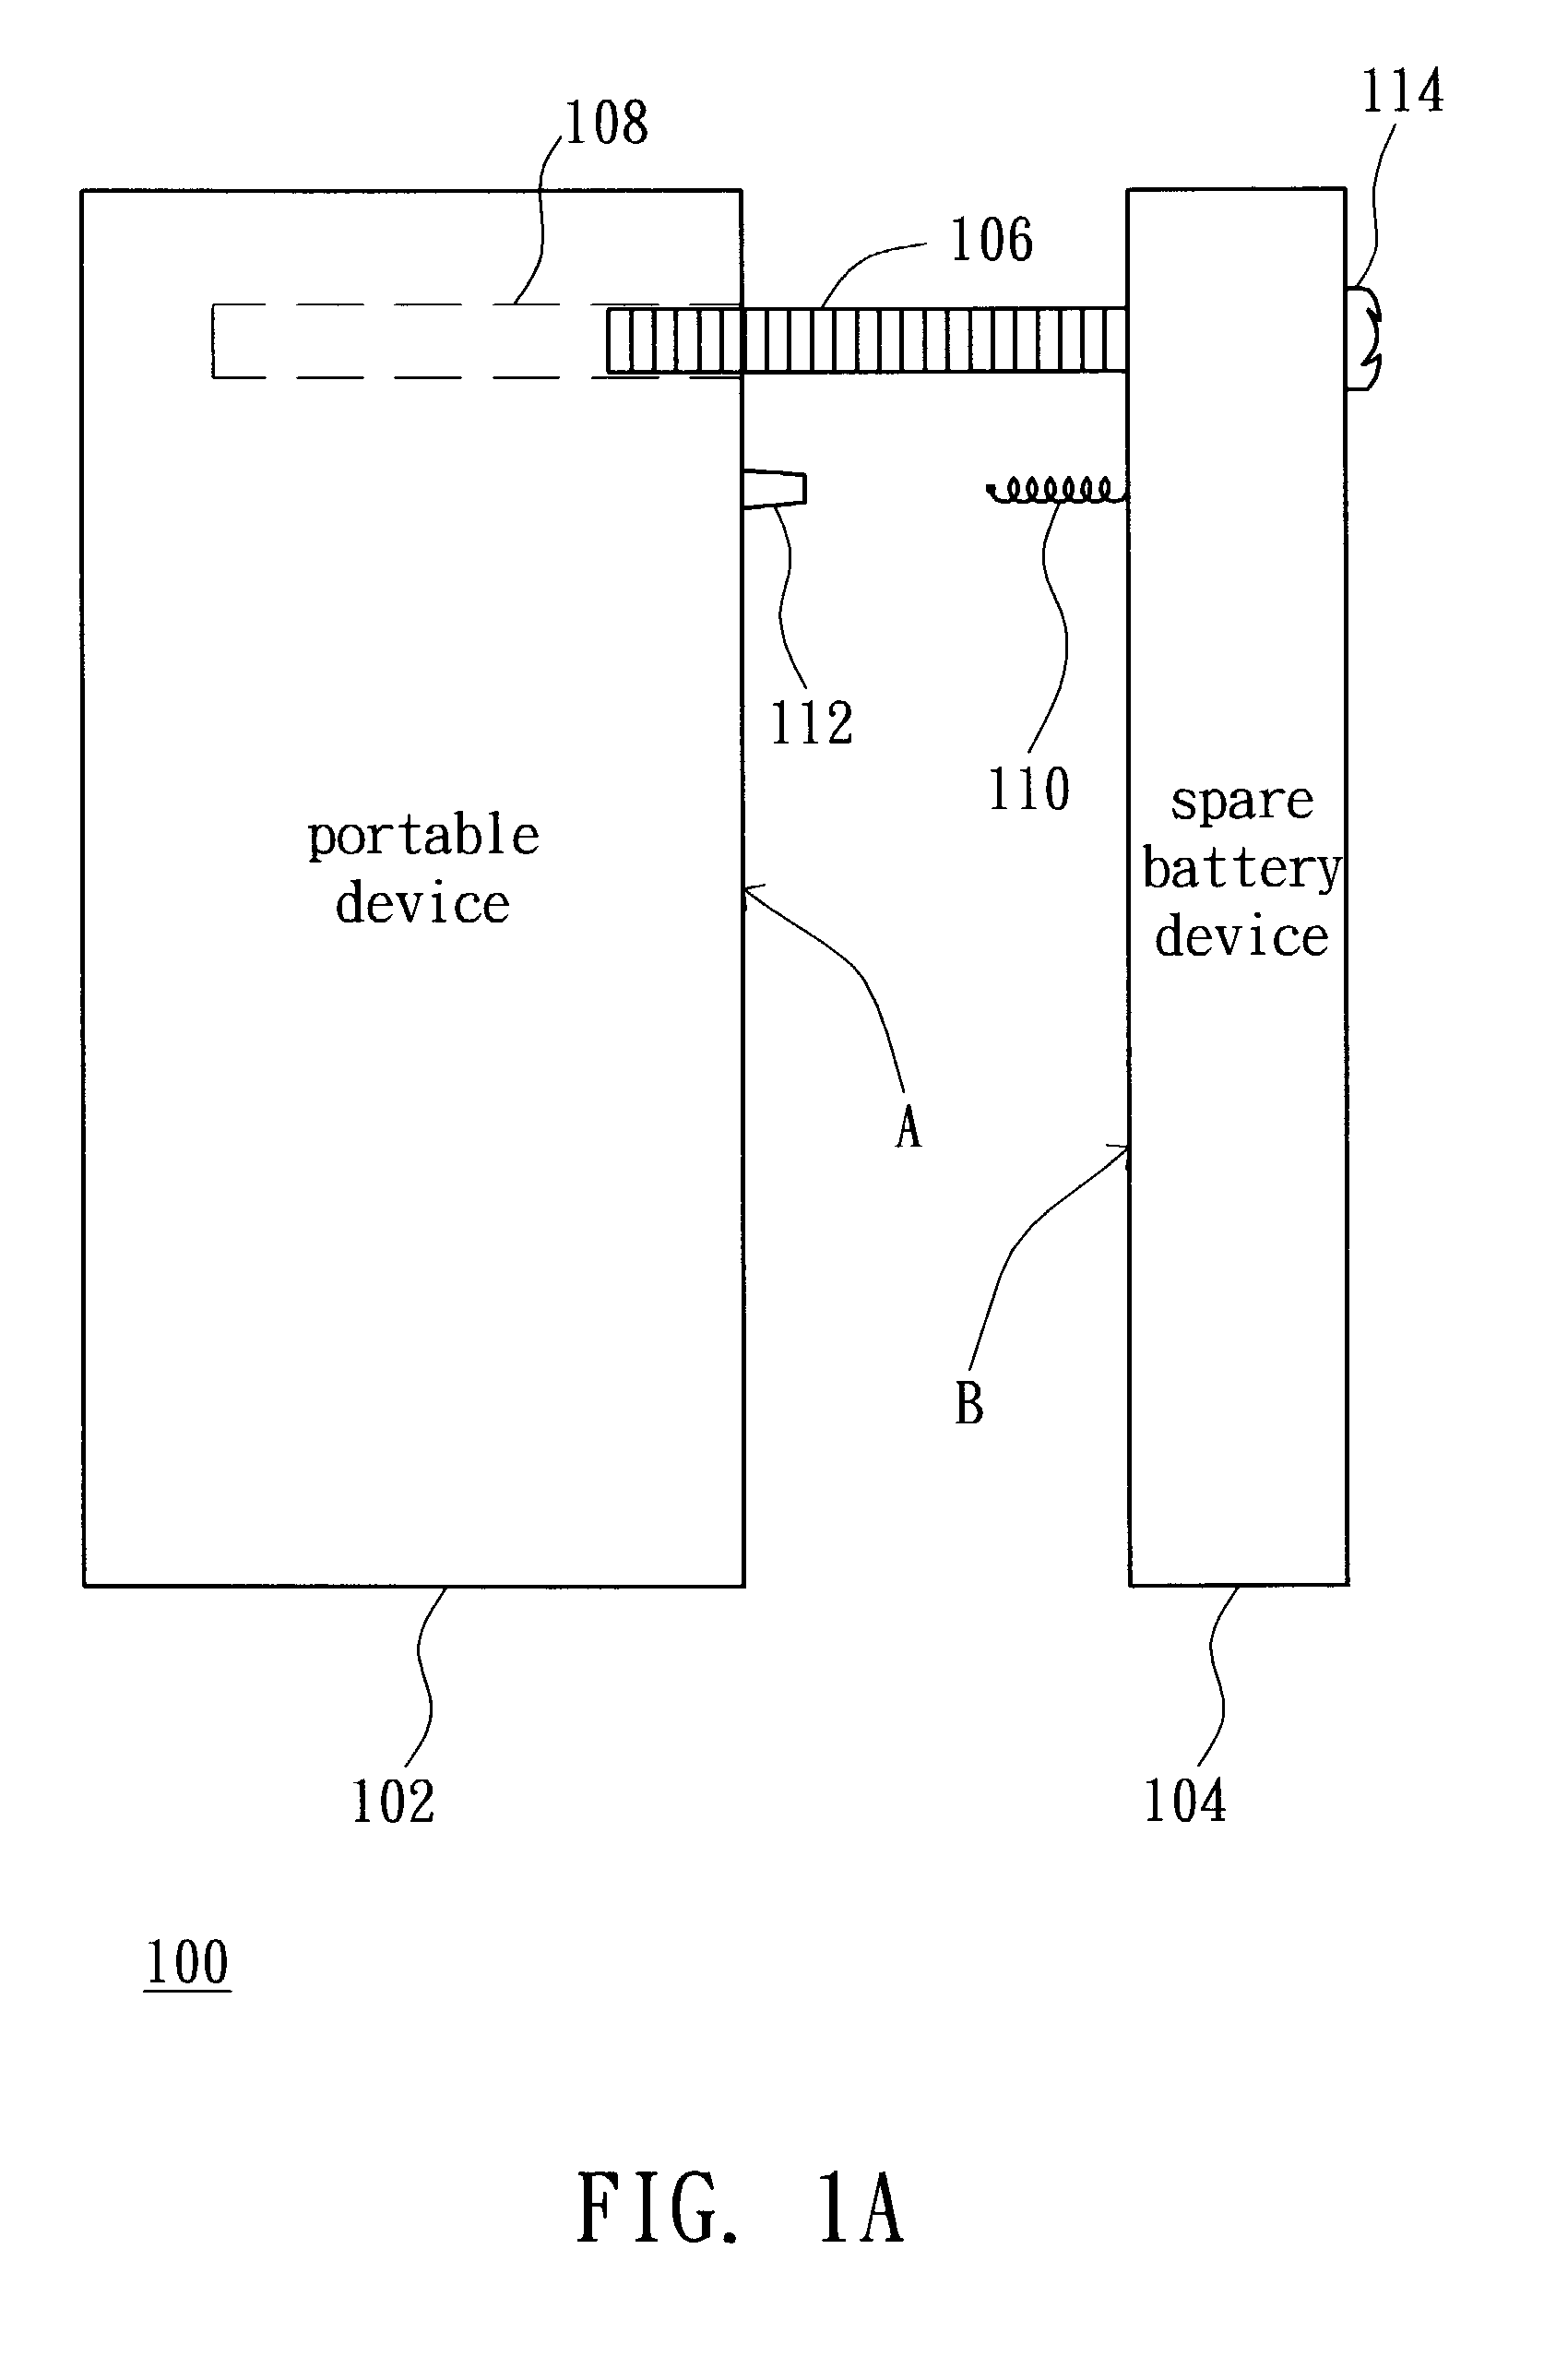 Portable electronic system equipped with a spare battery device